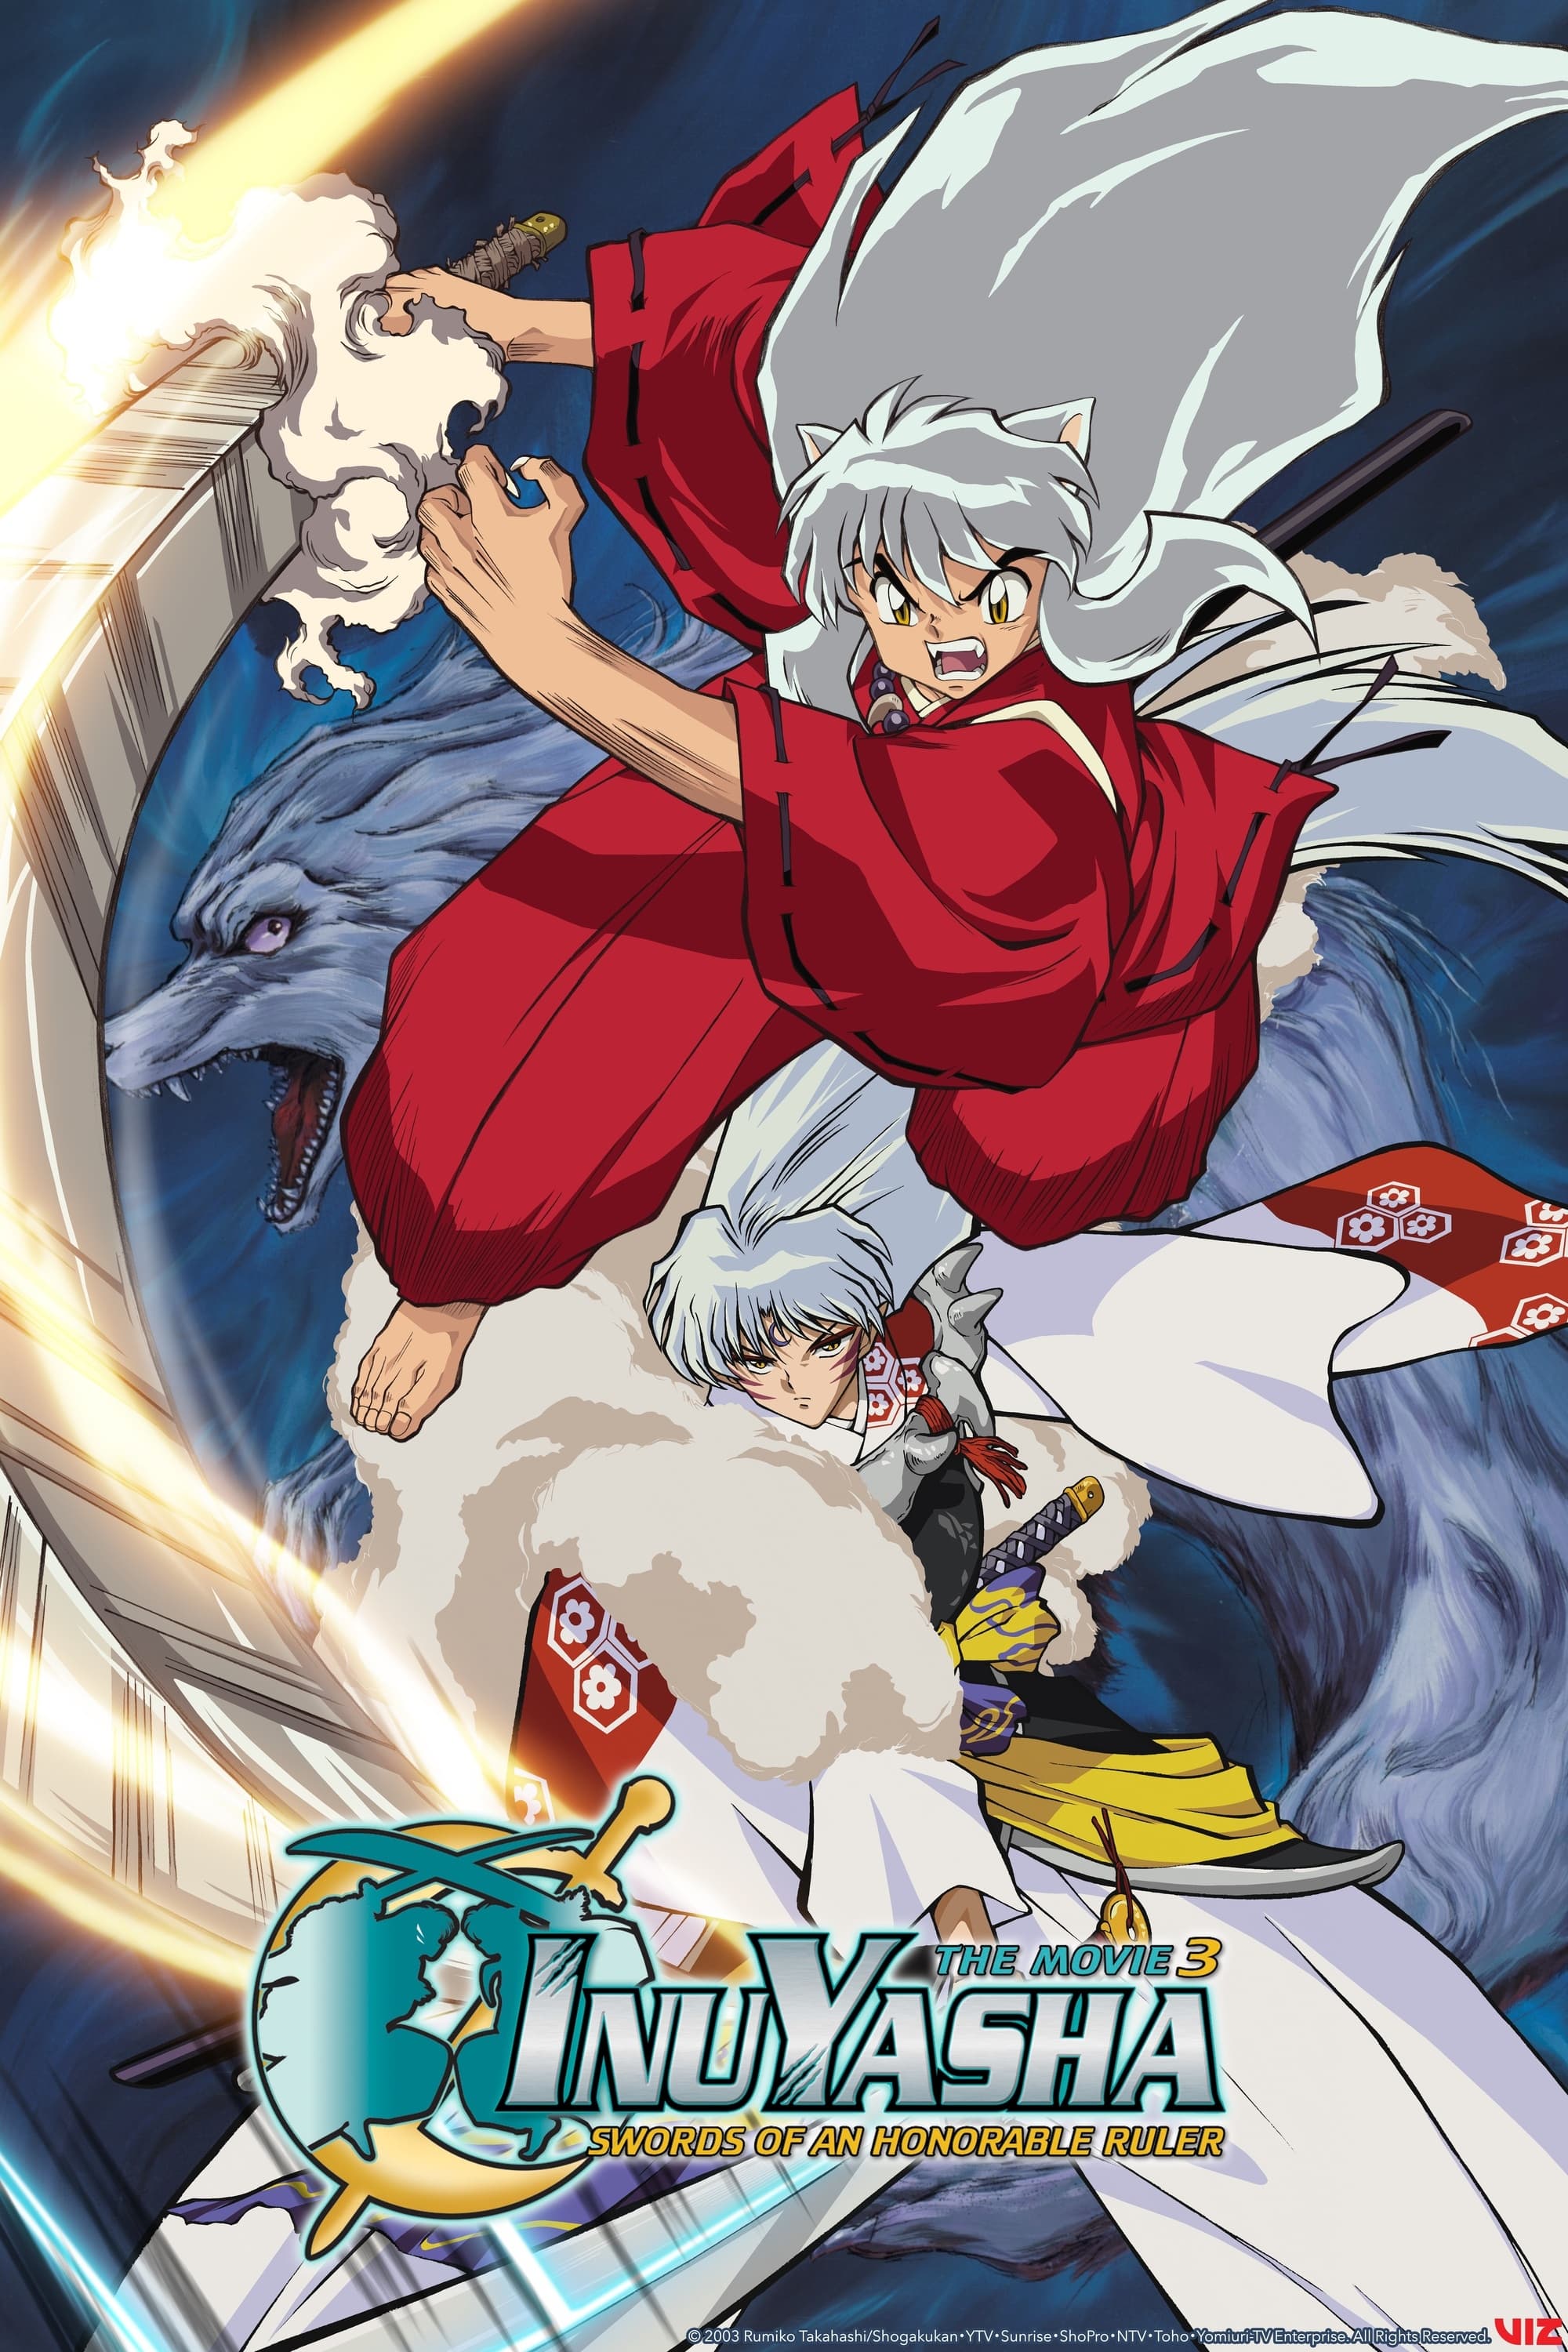 Inuyasha the Movie 3: Swords of an Honorable Ruler (2003)